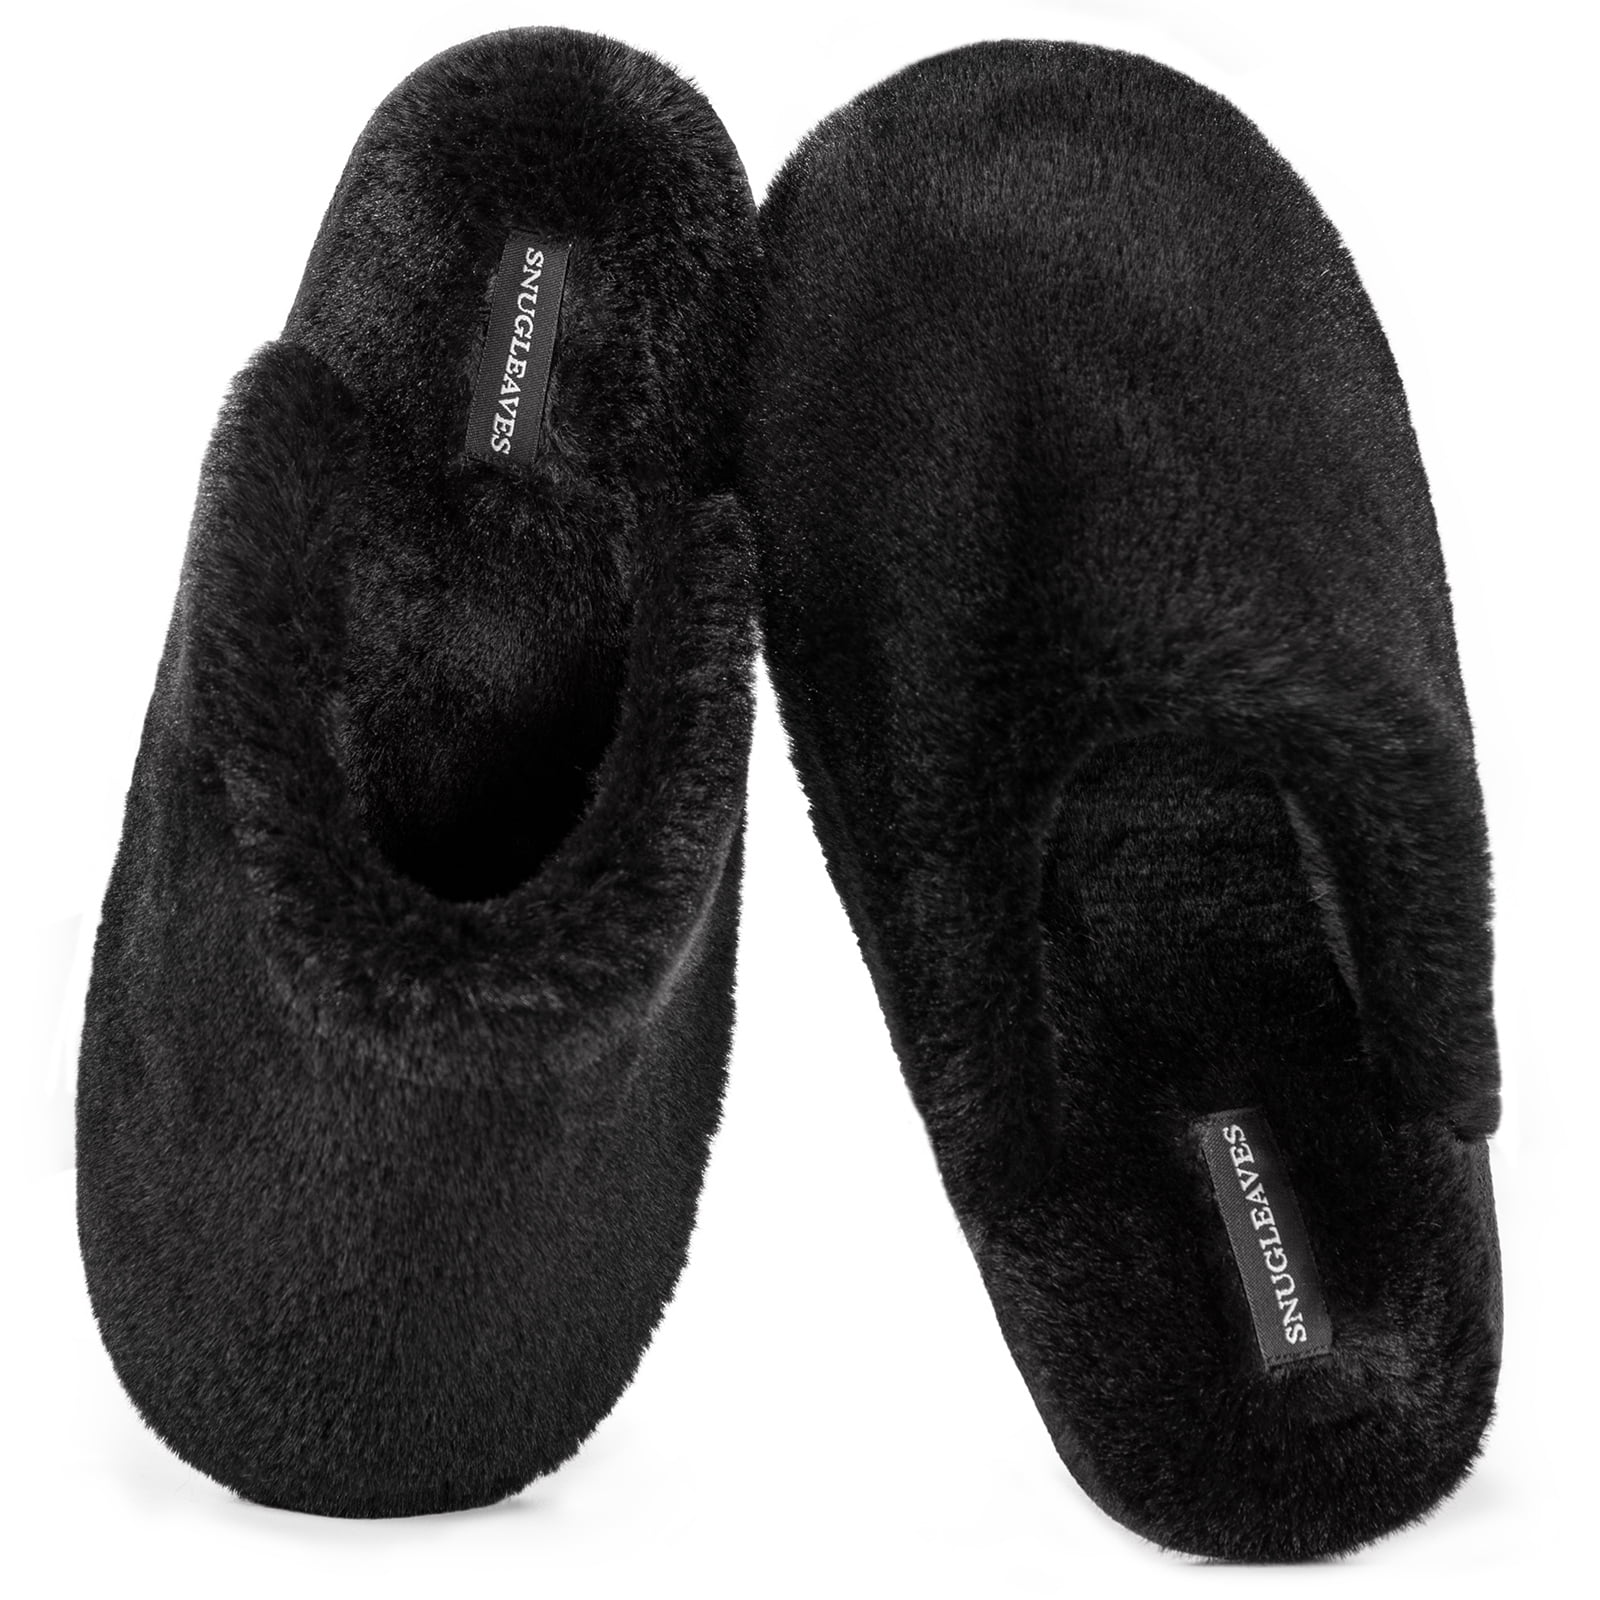  Evshine Women's Fuzzy Memory Foam Closed Back Slippers Knit  Fleece Lined House Shoes for Indoor & Outdoor, Black, 36-37 (Size 5-6.5)